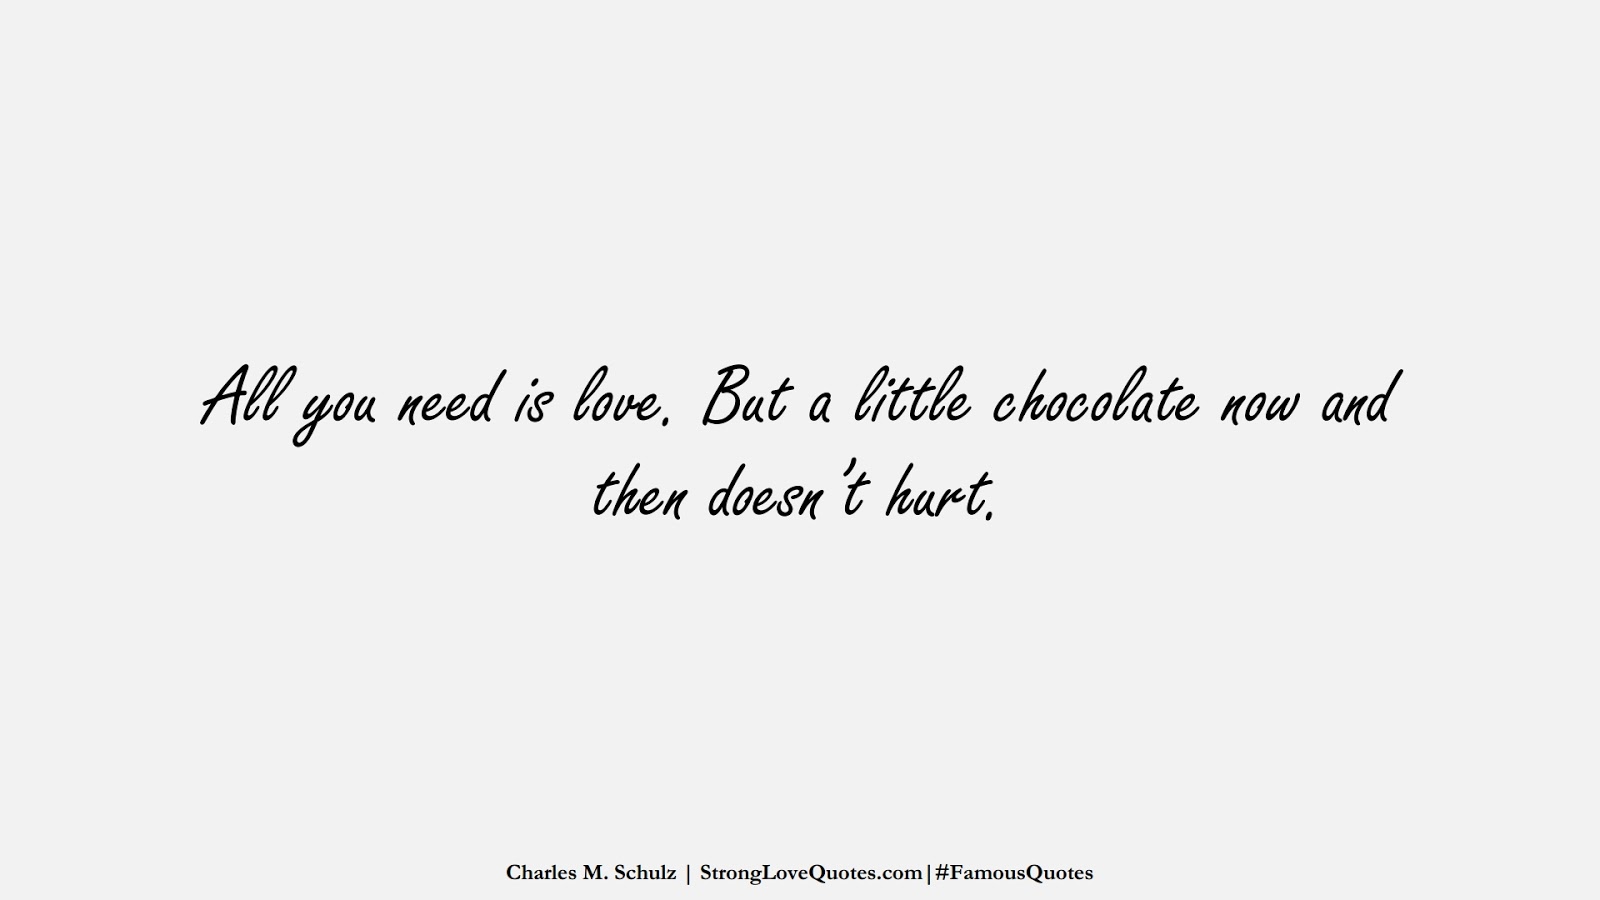 All you need is love. But a little chocolate now and then doesn’t hurt. (Charles M. Schulz);  #FamousQuotes